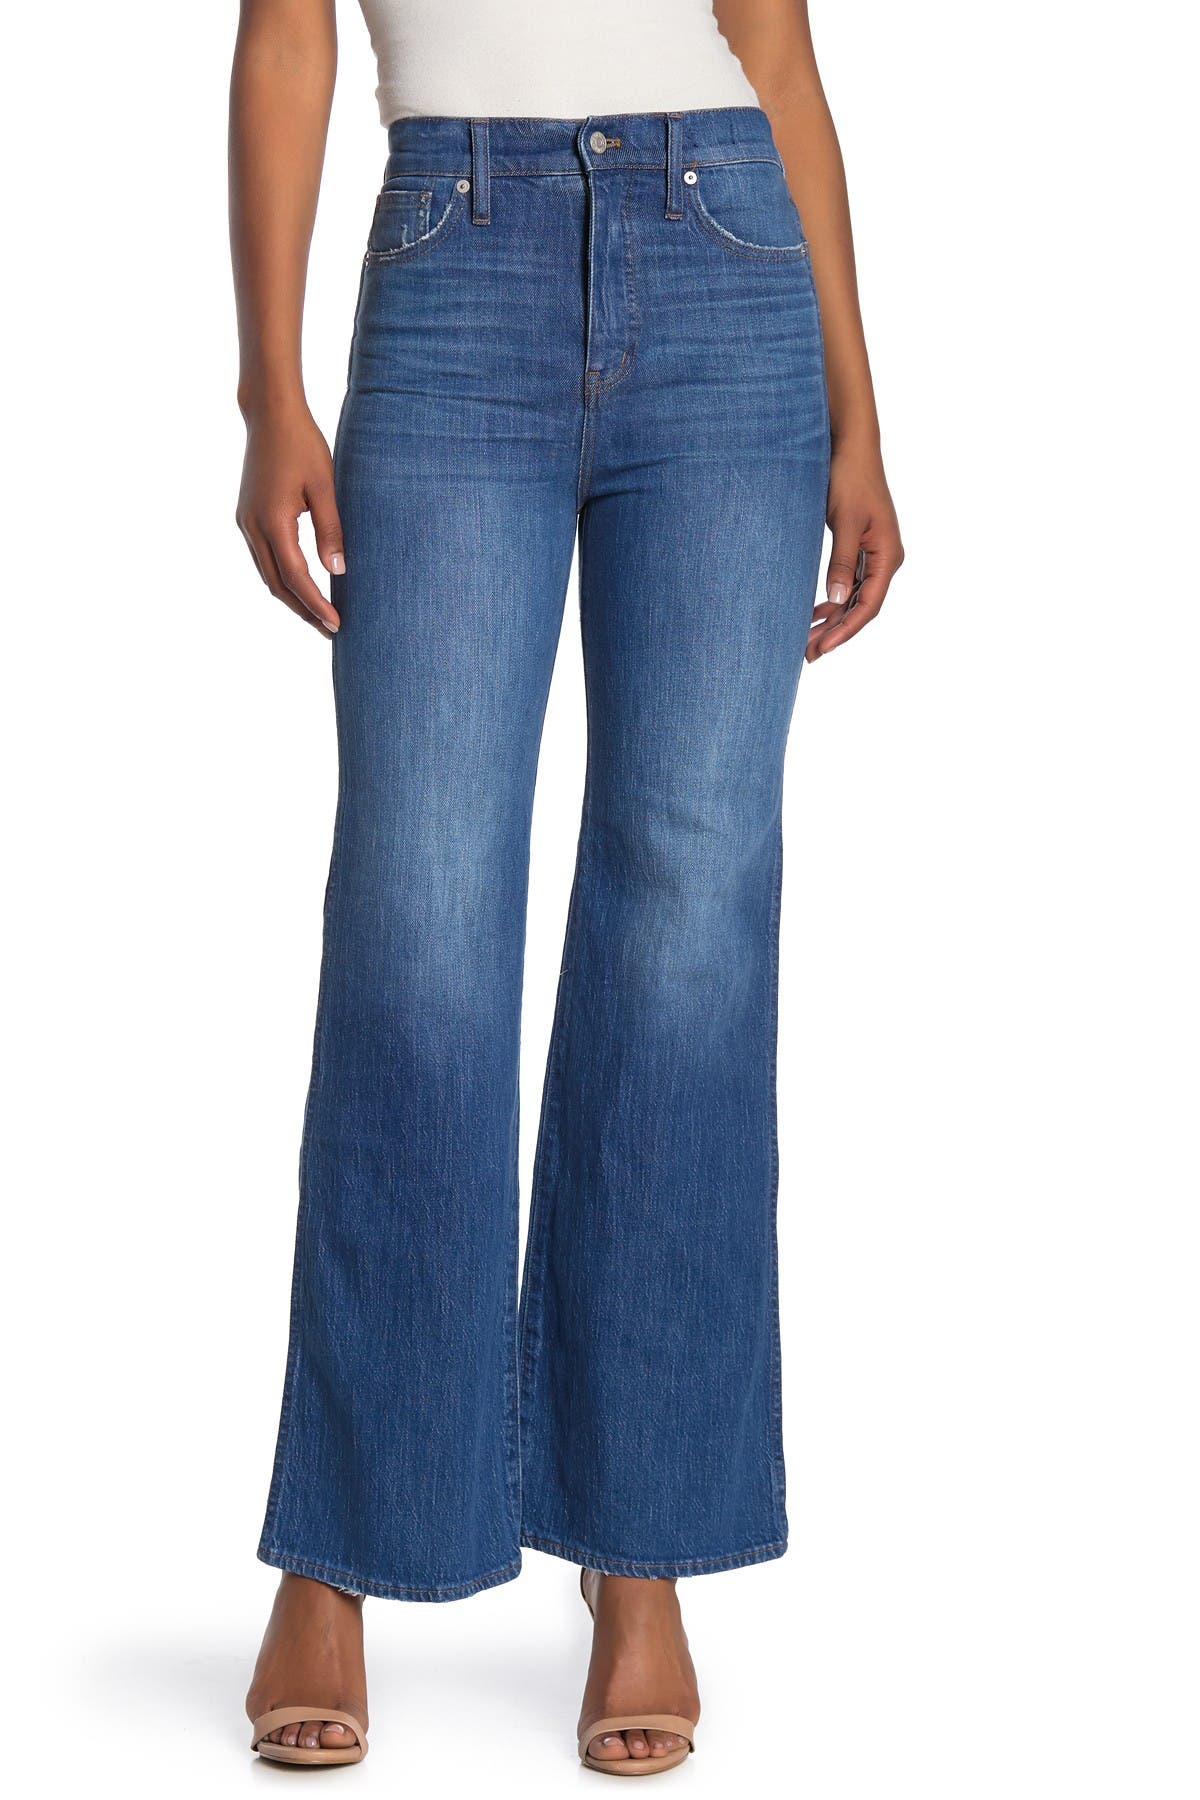 Madewell | High Rise Flare Jeans | Nordstrom Rack